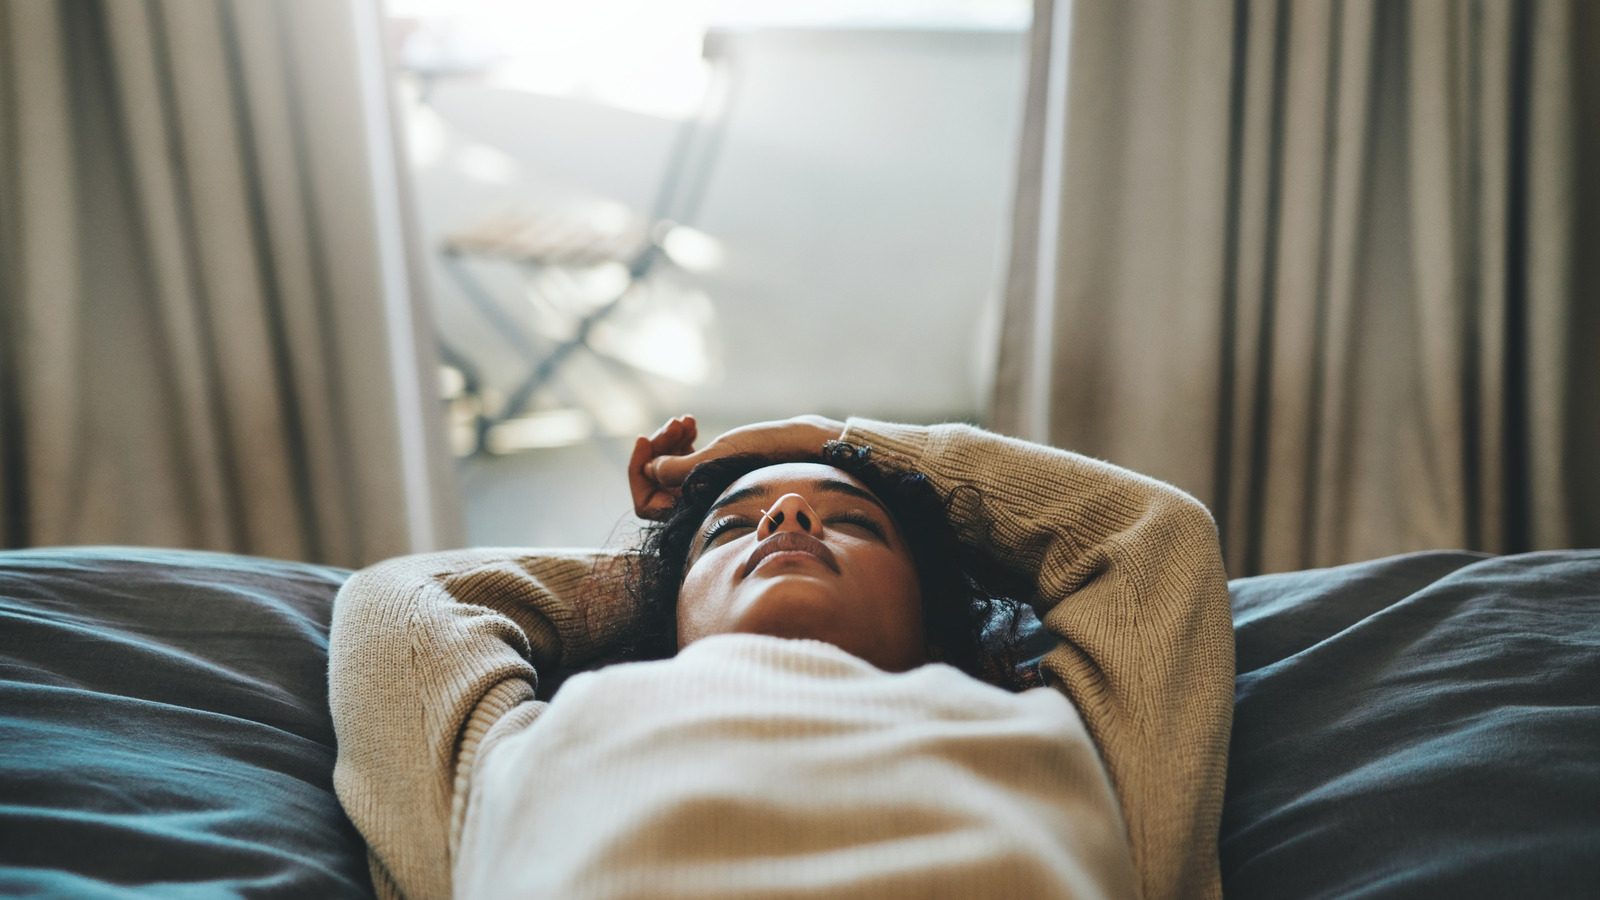 TikTok Swears By The Alpha Bridge Sleep Technique For Catching Easy Zs. But Does It Work? – Health Digest